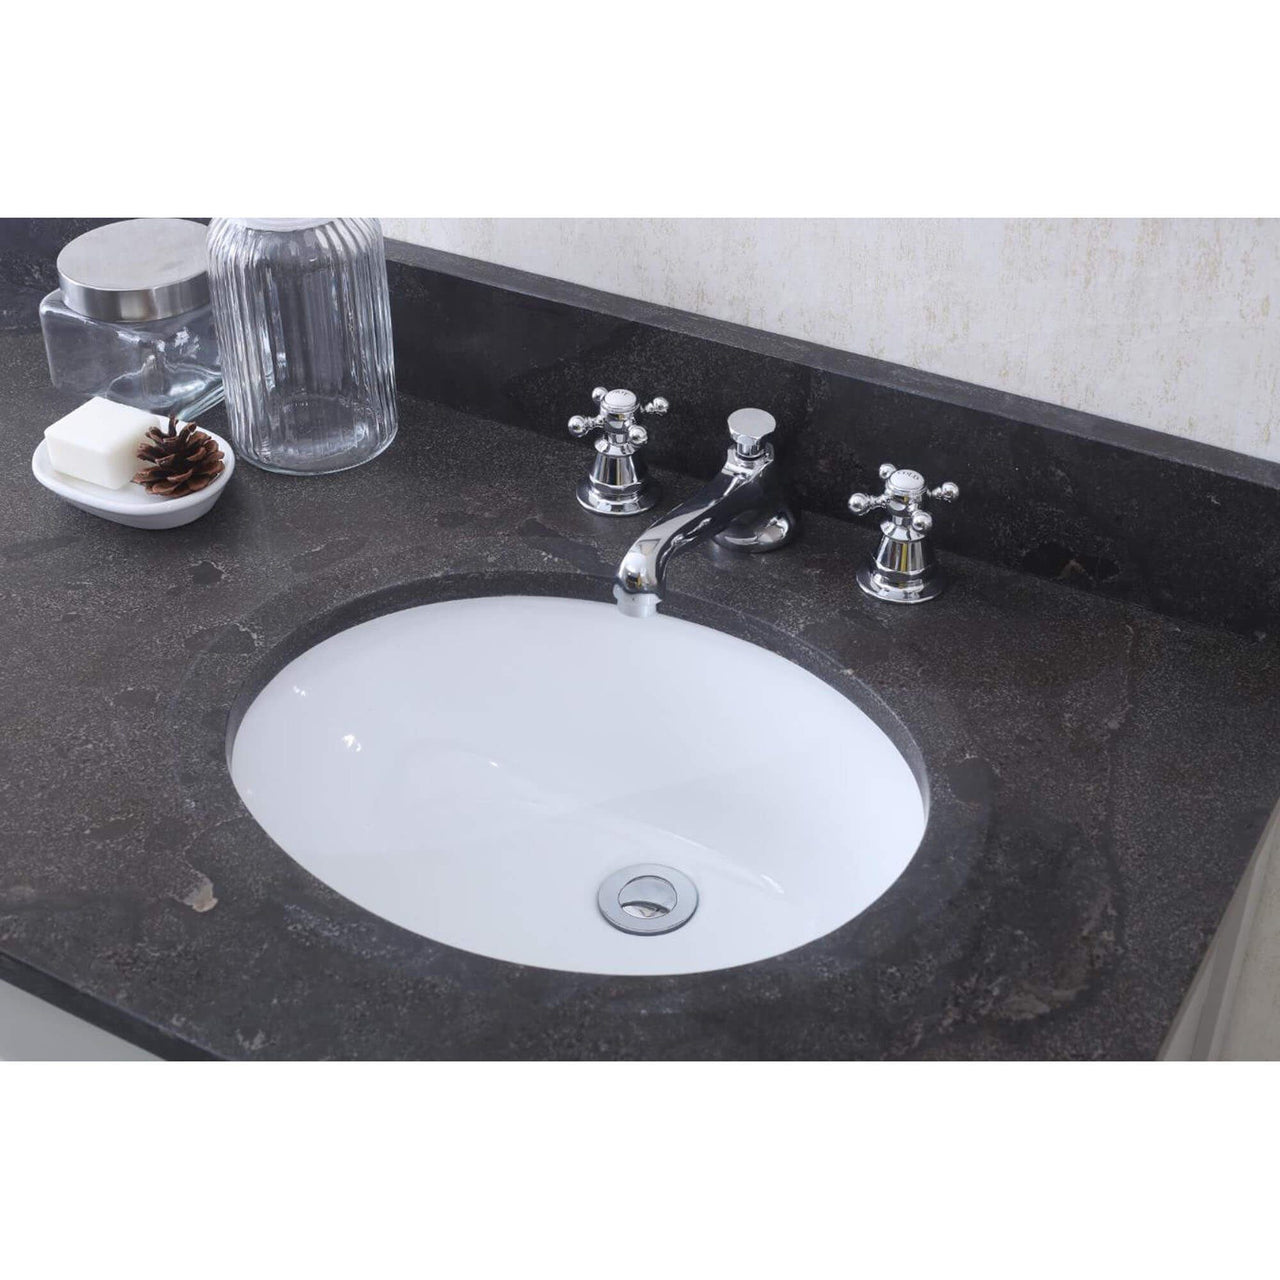 POTENZA 72" Earl Grey Double Sink Vanity With 2 Framed Mirrors And Faucets Vanity Water Creation 